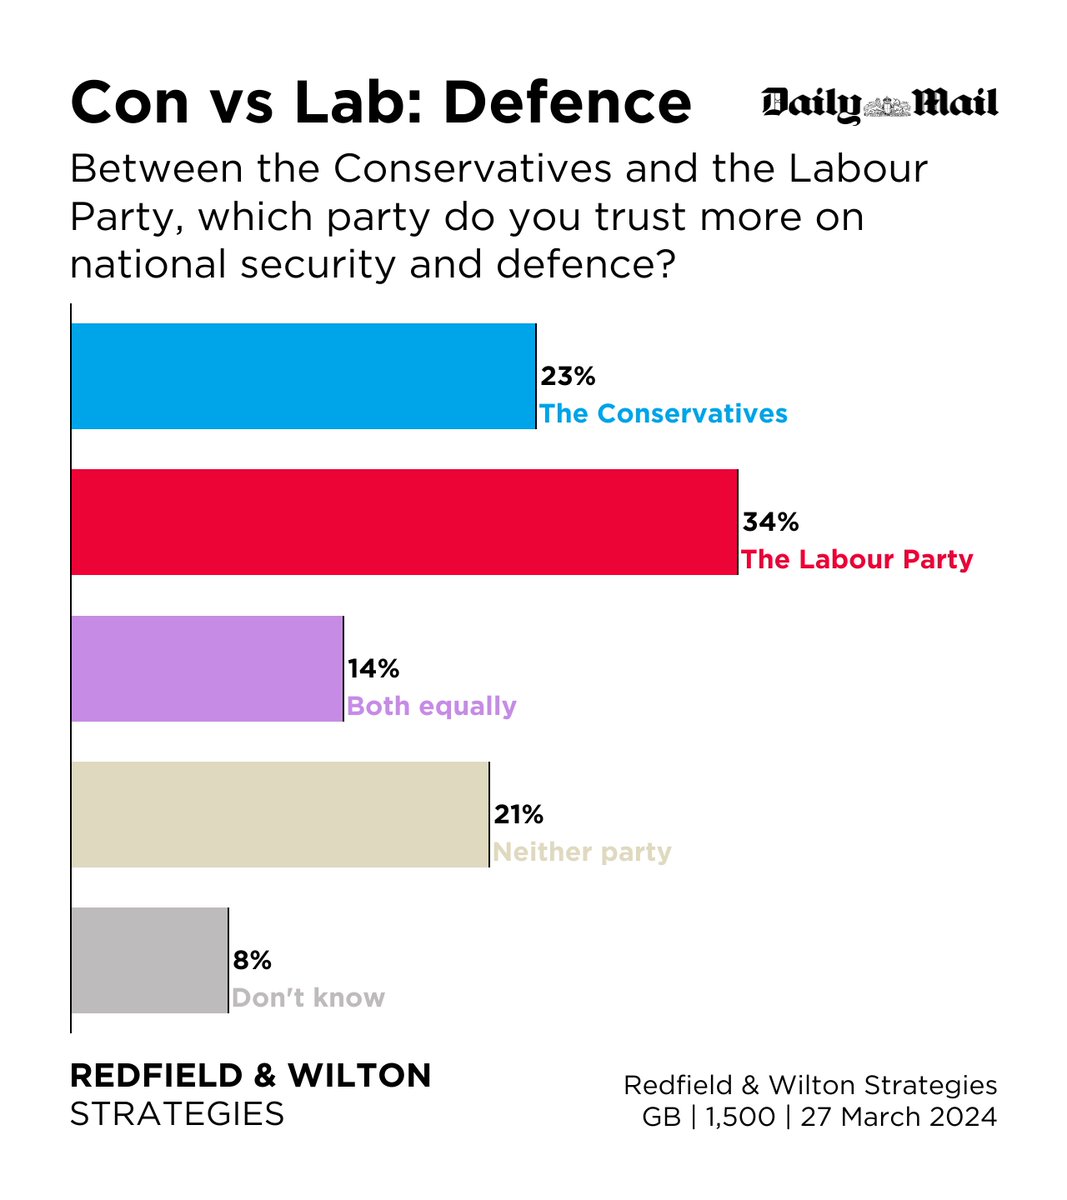 Between the Conservatives and the Labour Party, which party do Britons trust more on national security and defence? (27 March) The Labour Party 34% The Conservatives 23% Neither 21% Both 14% redfieldandwiltonstrategies.com/british-voters…